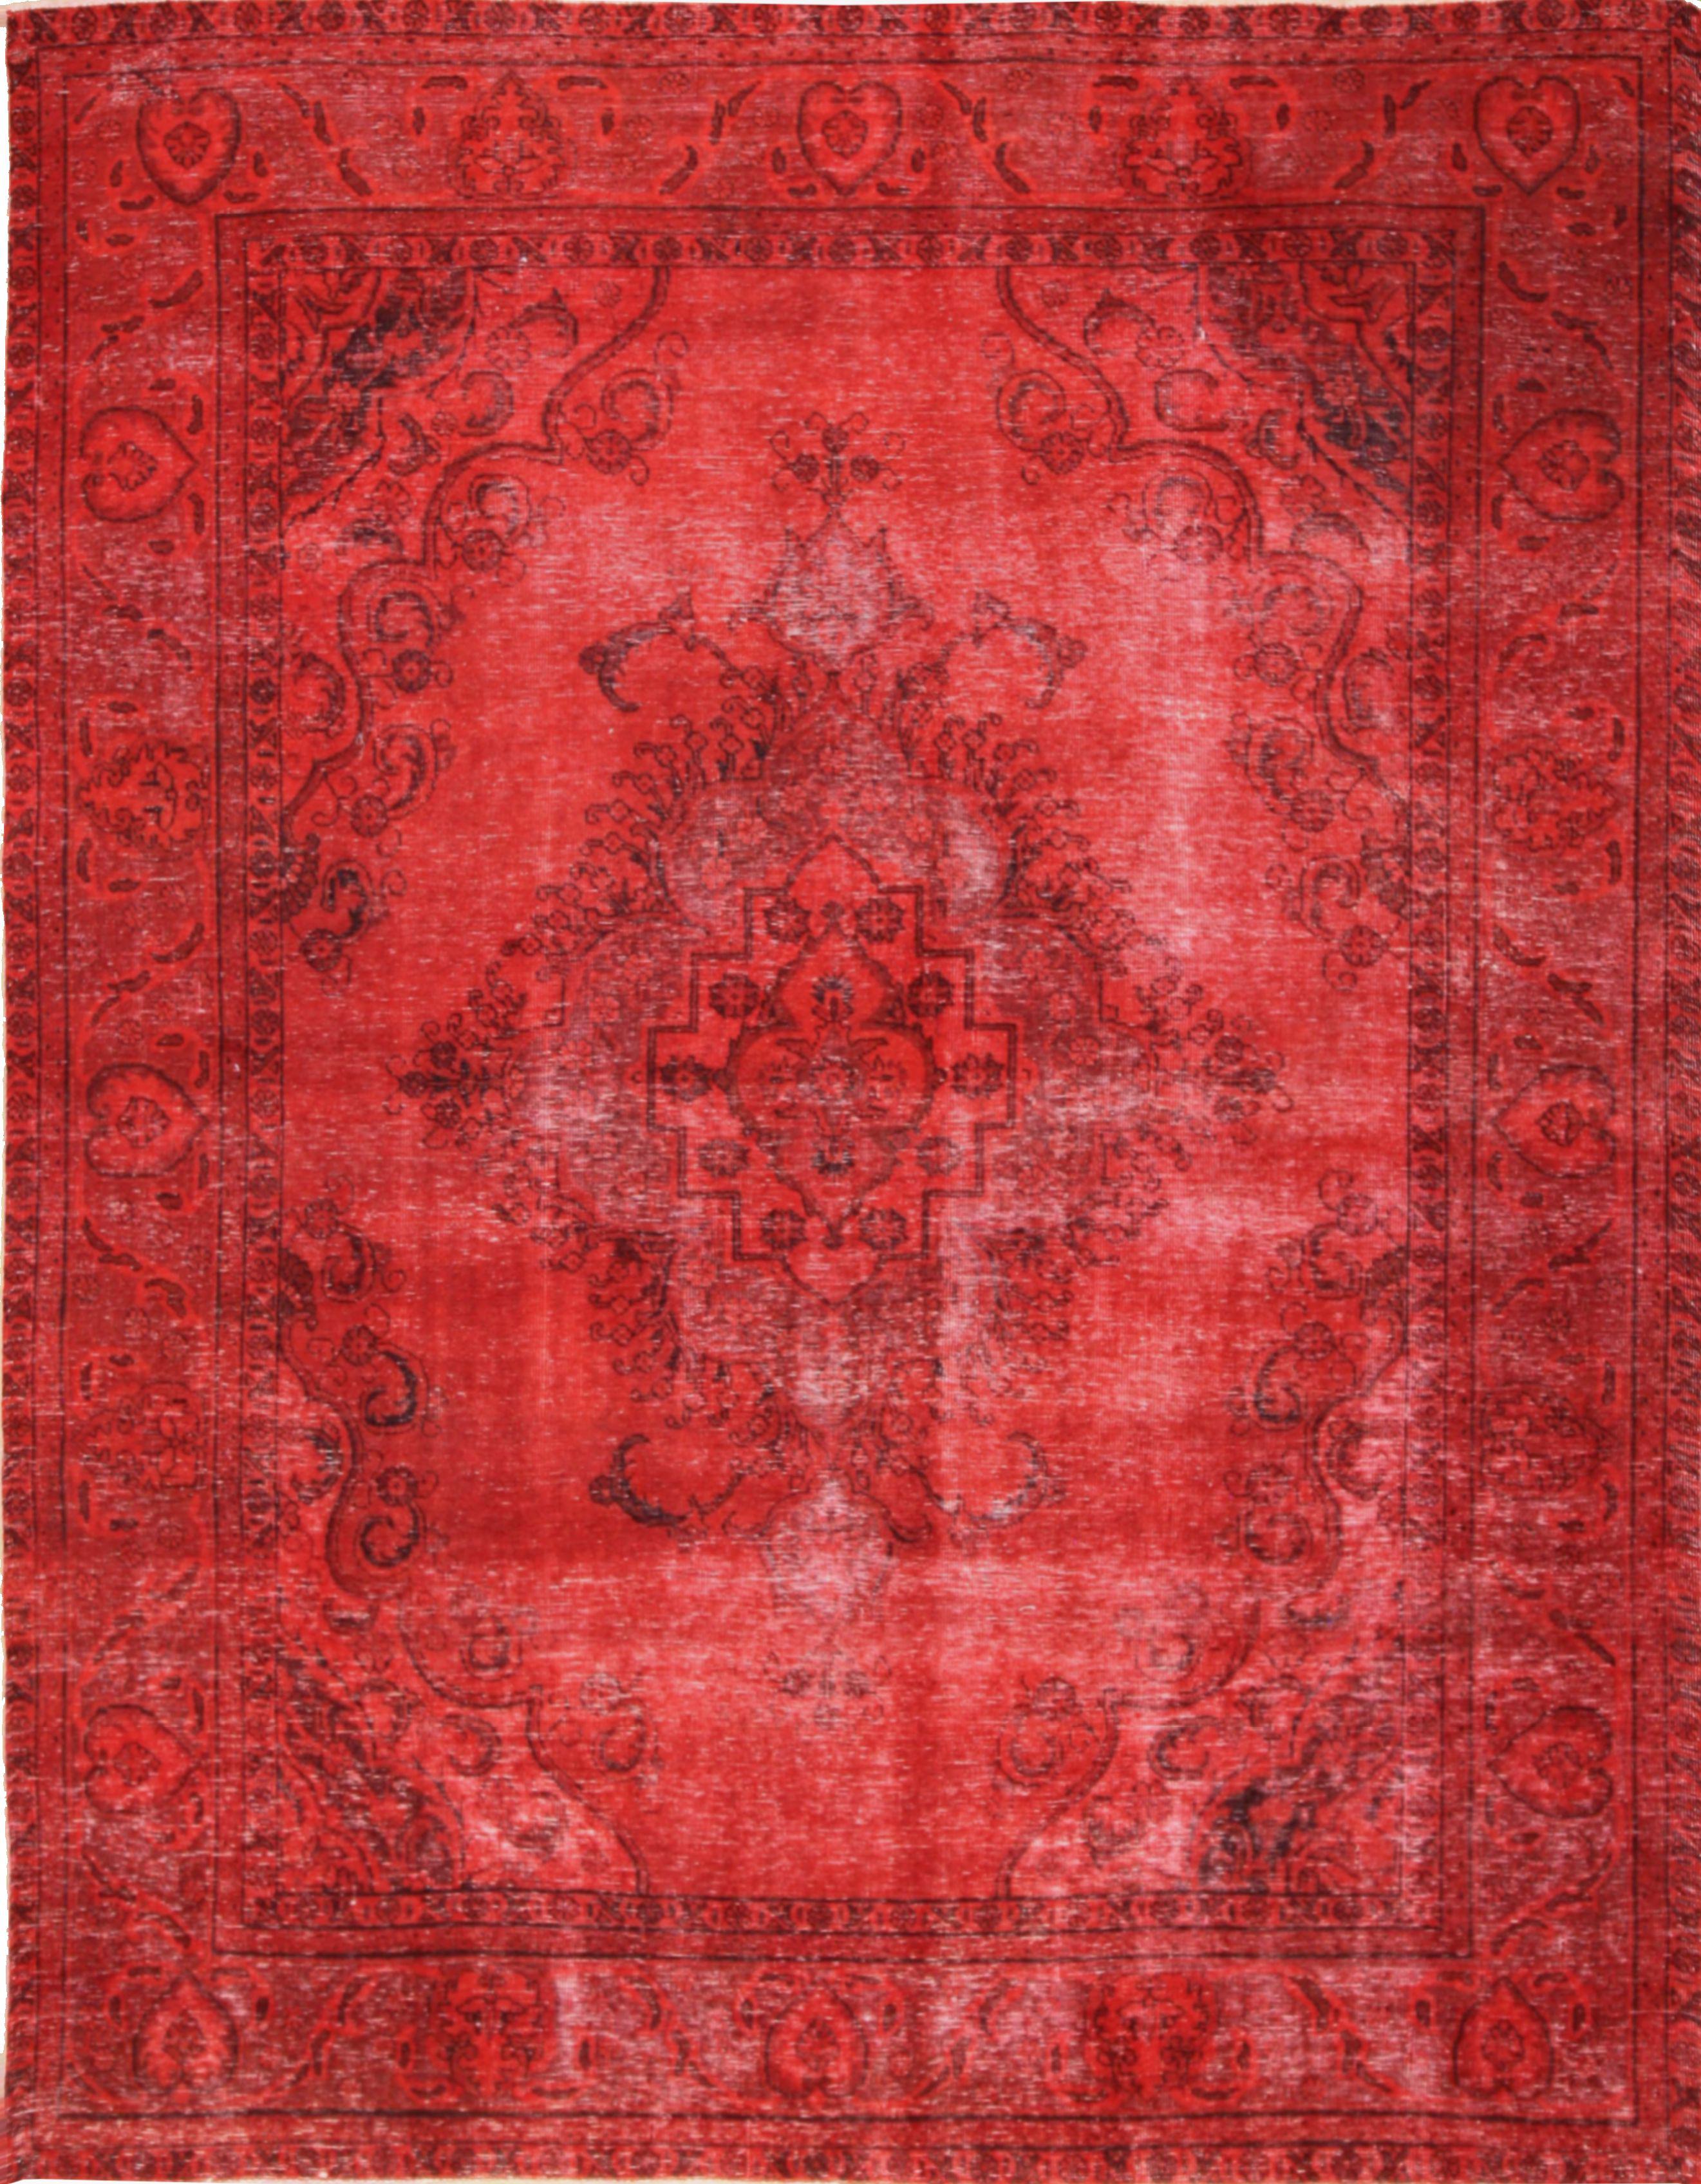 Hand Knotted Wool Red Transitional India Rug 8' x 10'4"